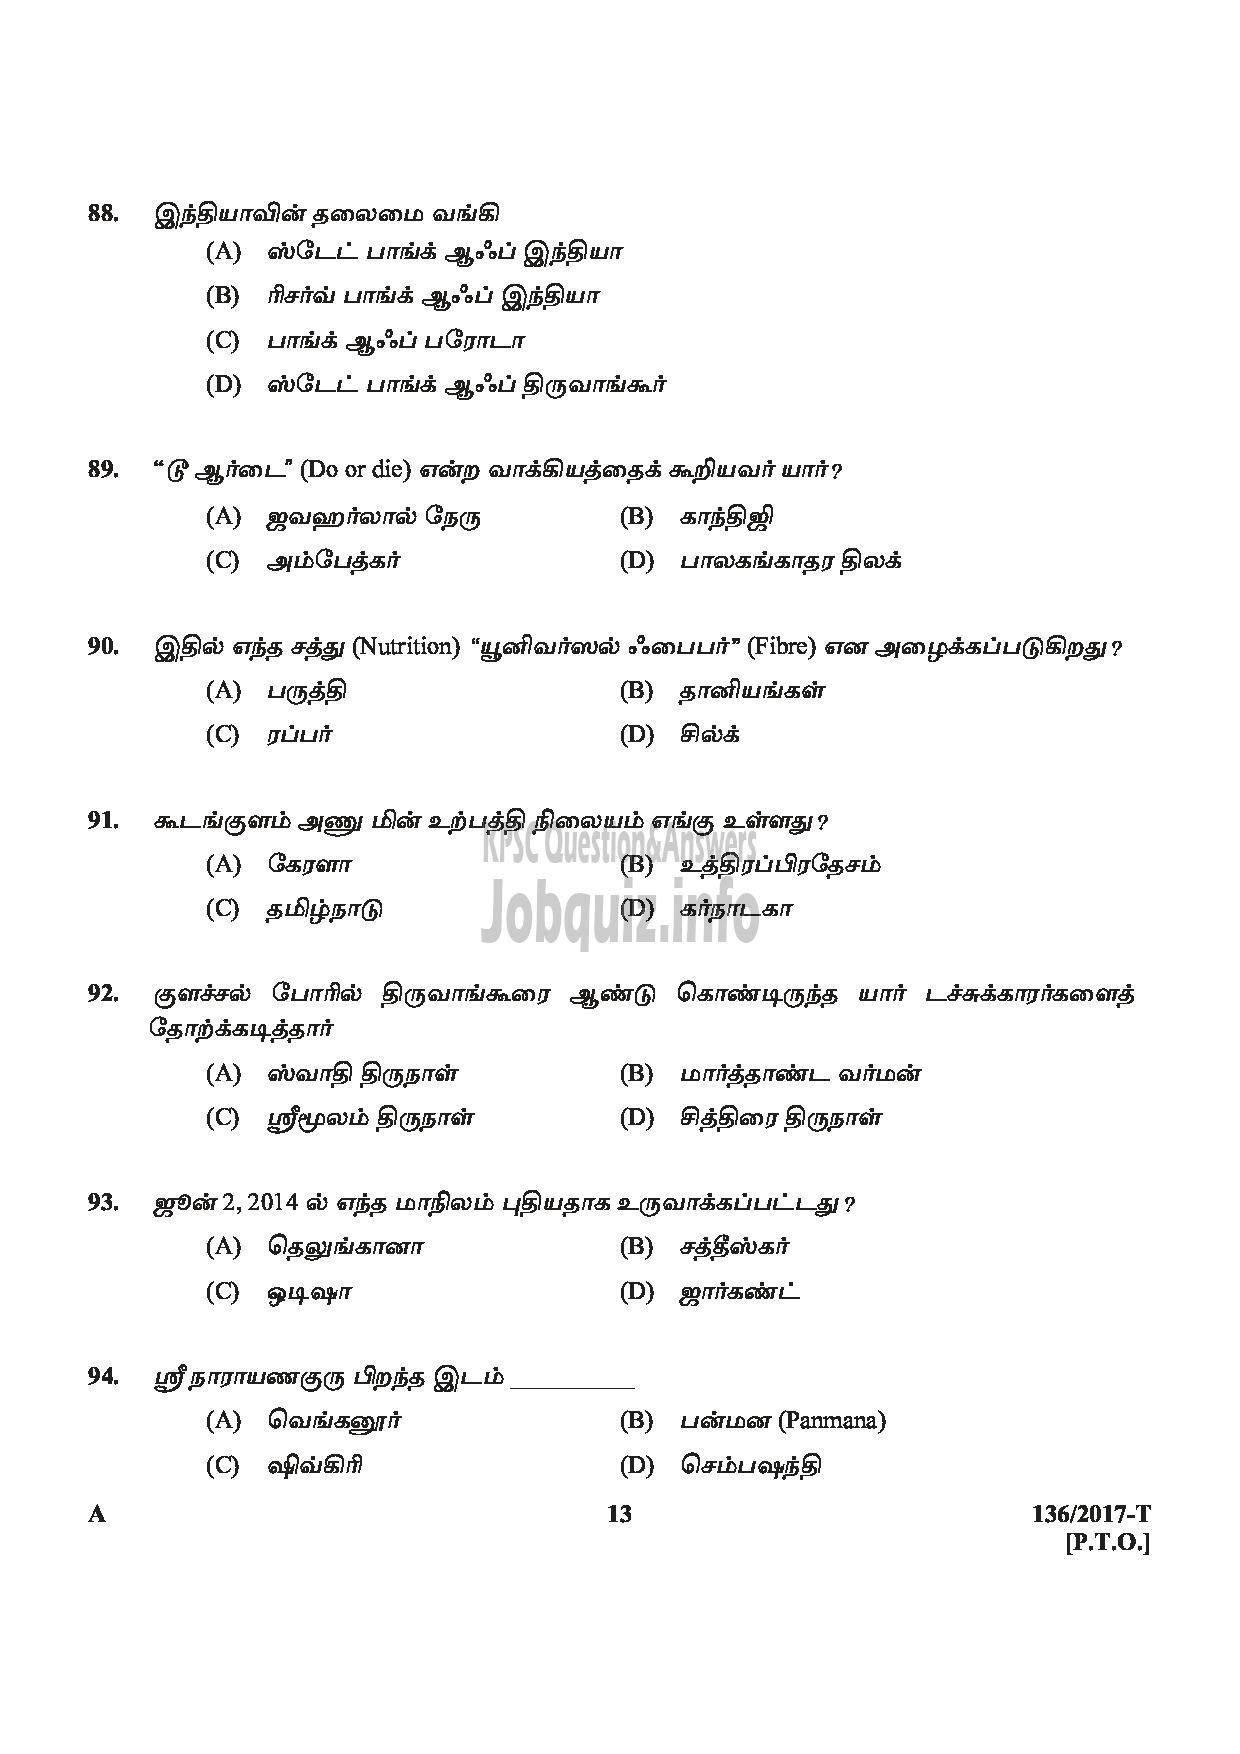 Kerala PSC Question Paper - METER READER/SPOT BILLER SPECIAL RECRUITMENT FROM AMONG ST ONLY MEDIUM OF QUESTION TAMIL-13